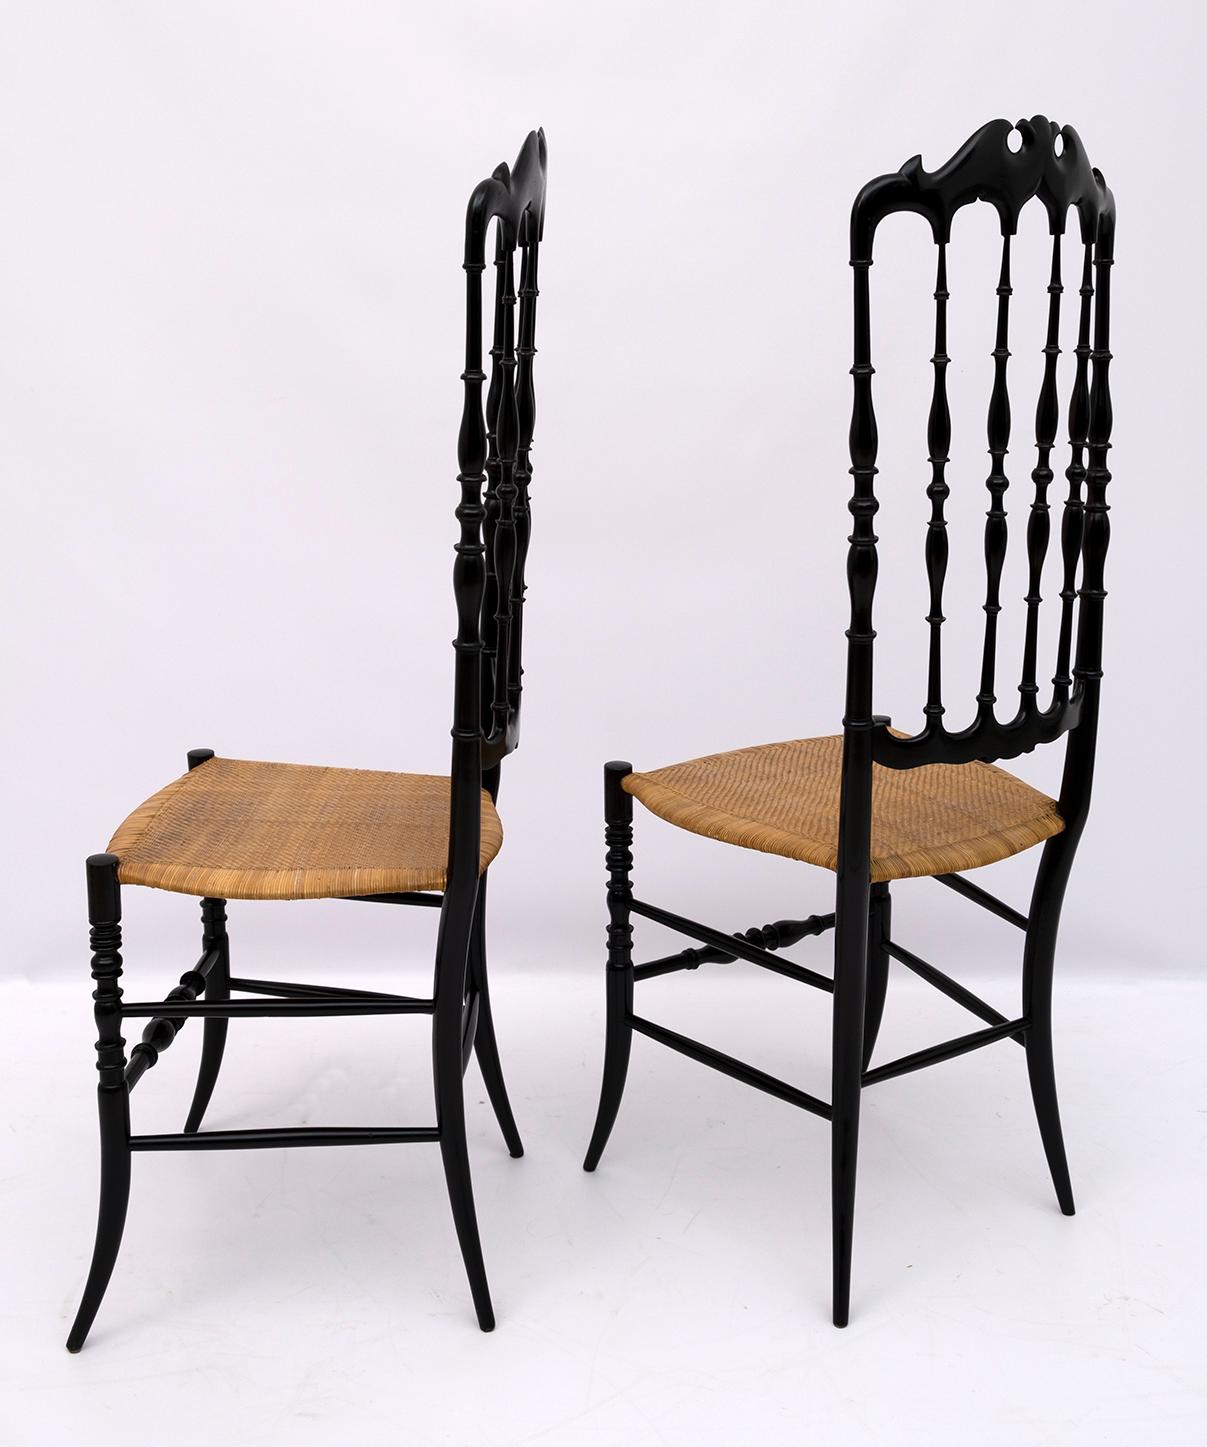 This pair of Chiavari typical chairs was designed by Gaetano Descalzi in the city of Chiavari in Italy, where they have since been produced in various models.
Made of black lacquered beech and seat in woven wicker.

Chiavari was created in 1807